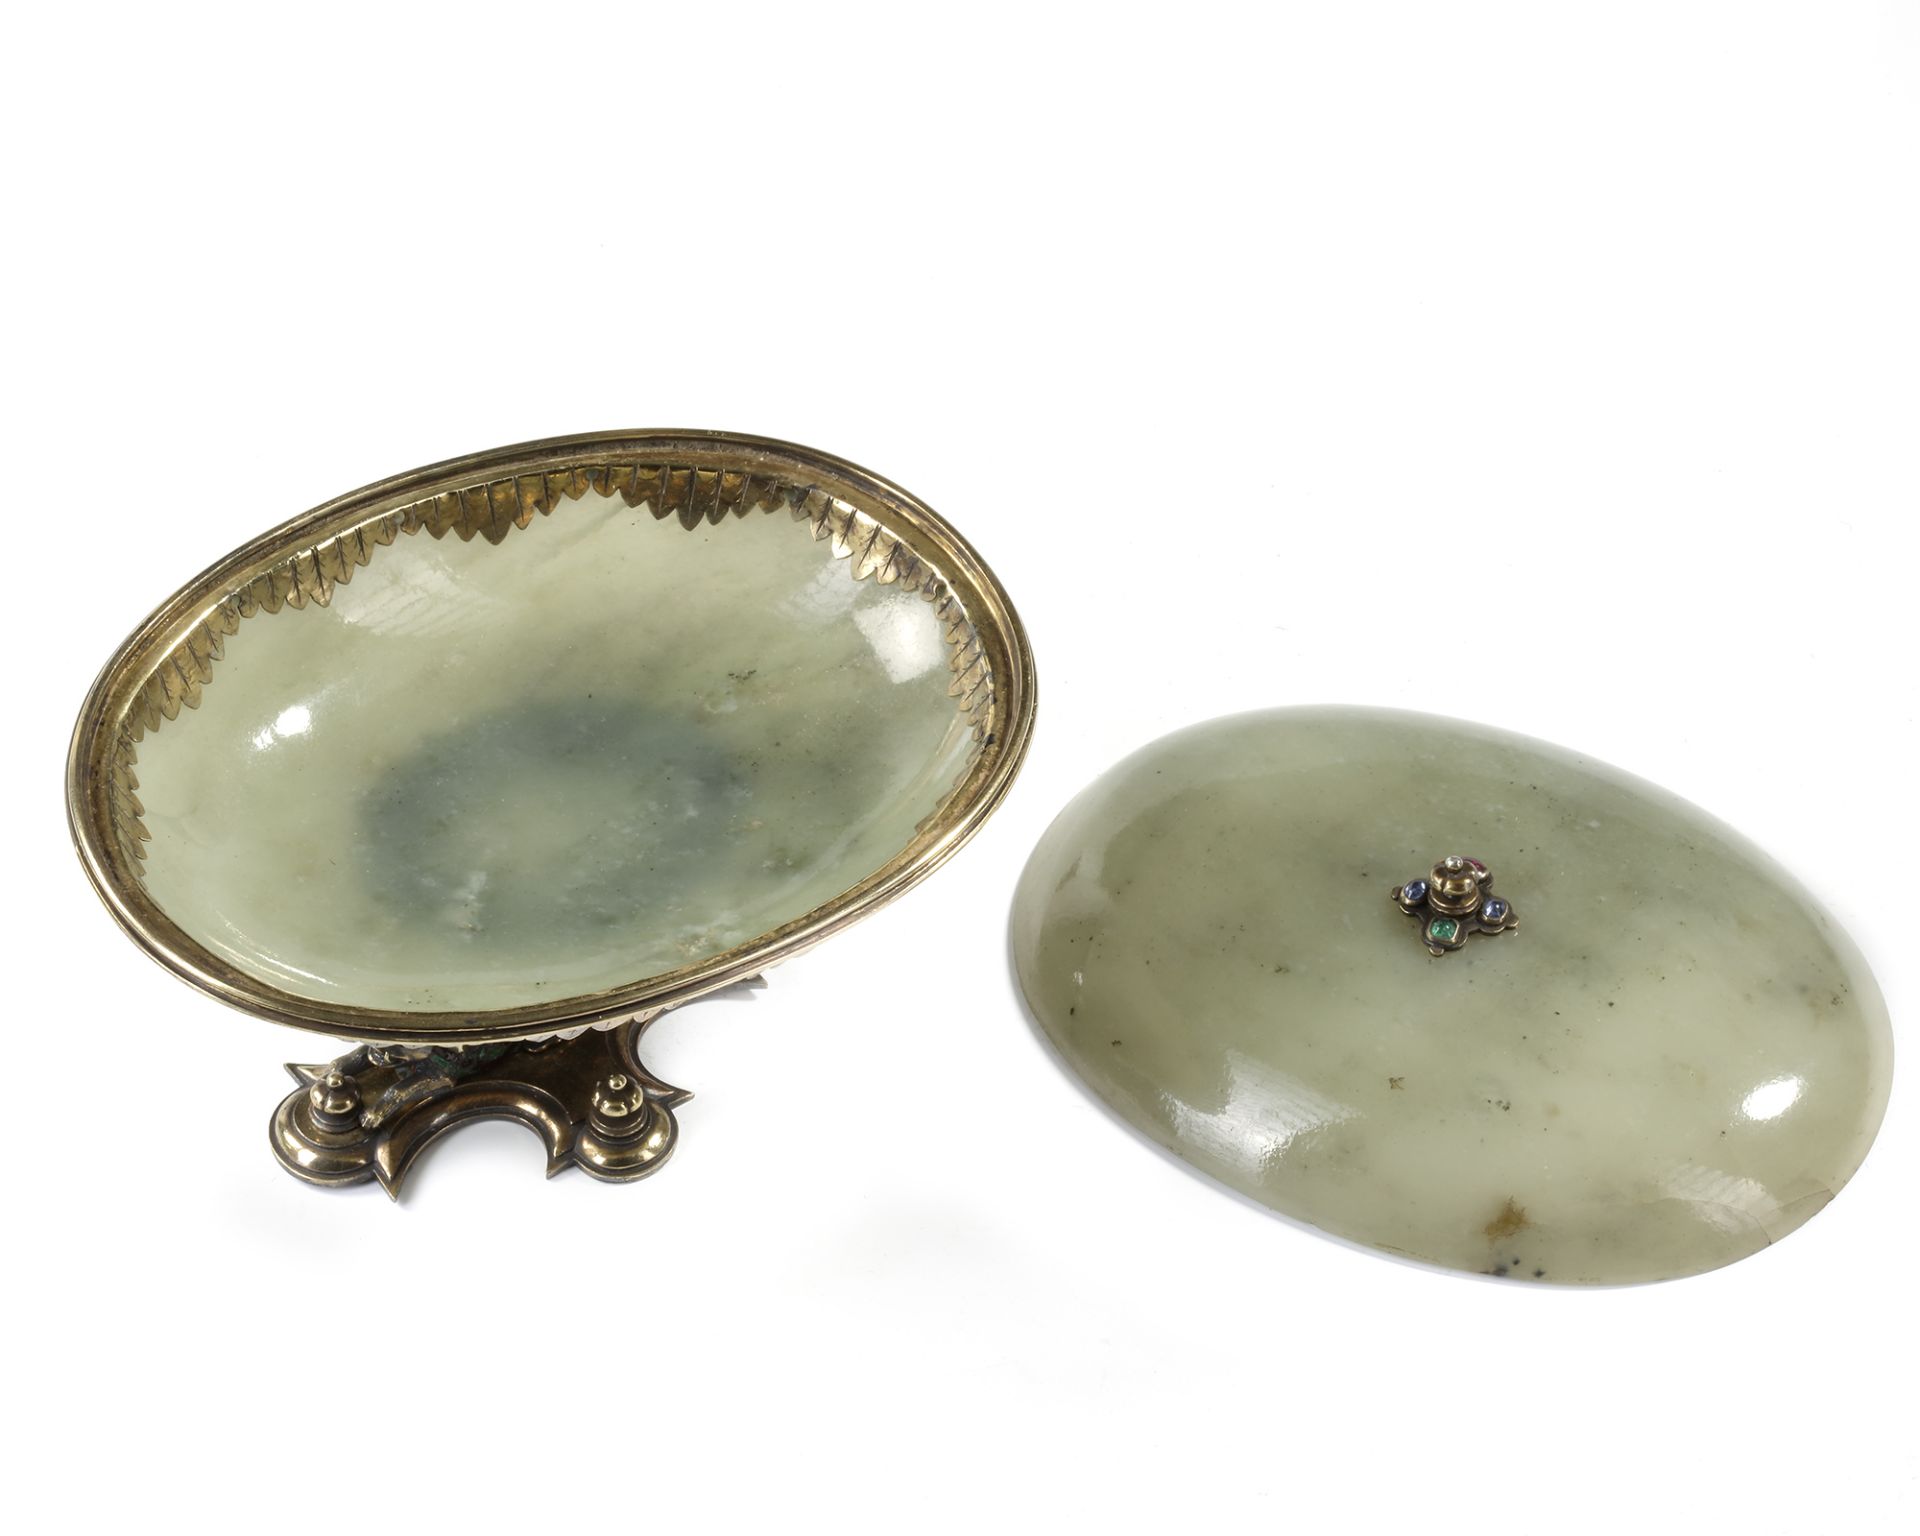 A MUGHAL JADE BOWL AND COVER, 18TH CENTURY - Image 3 of 4